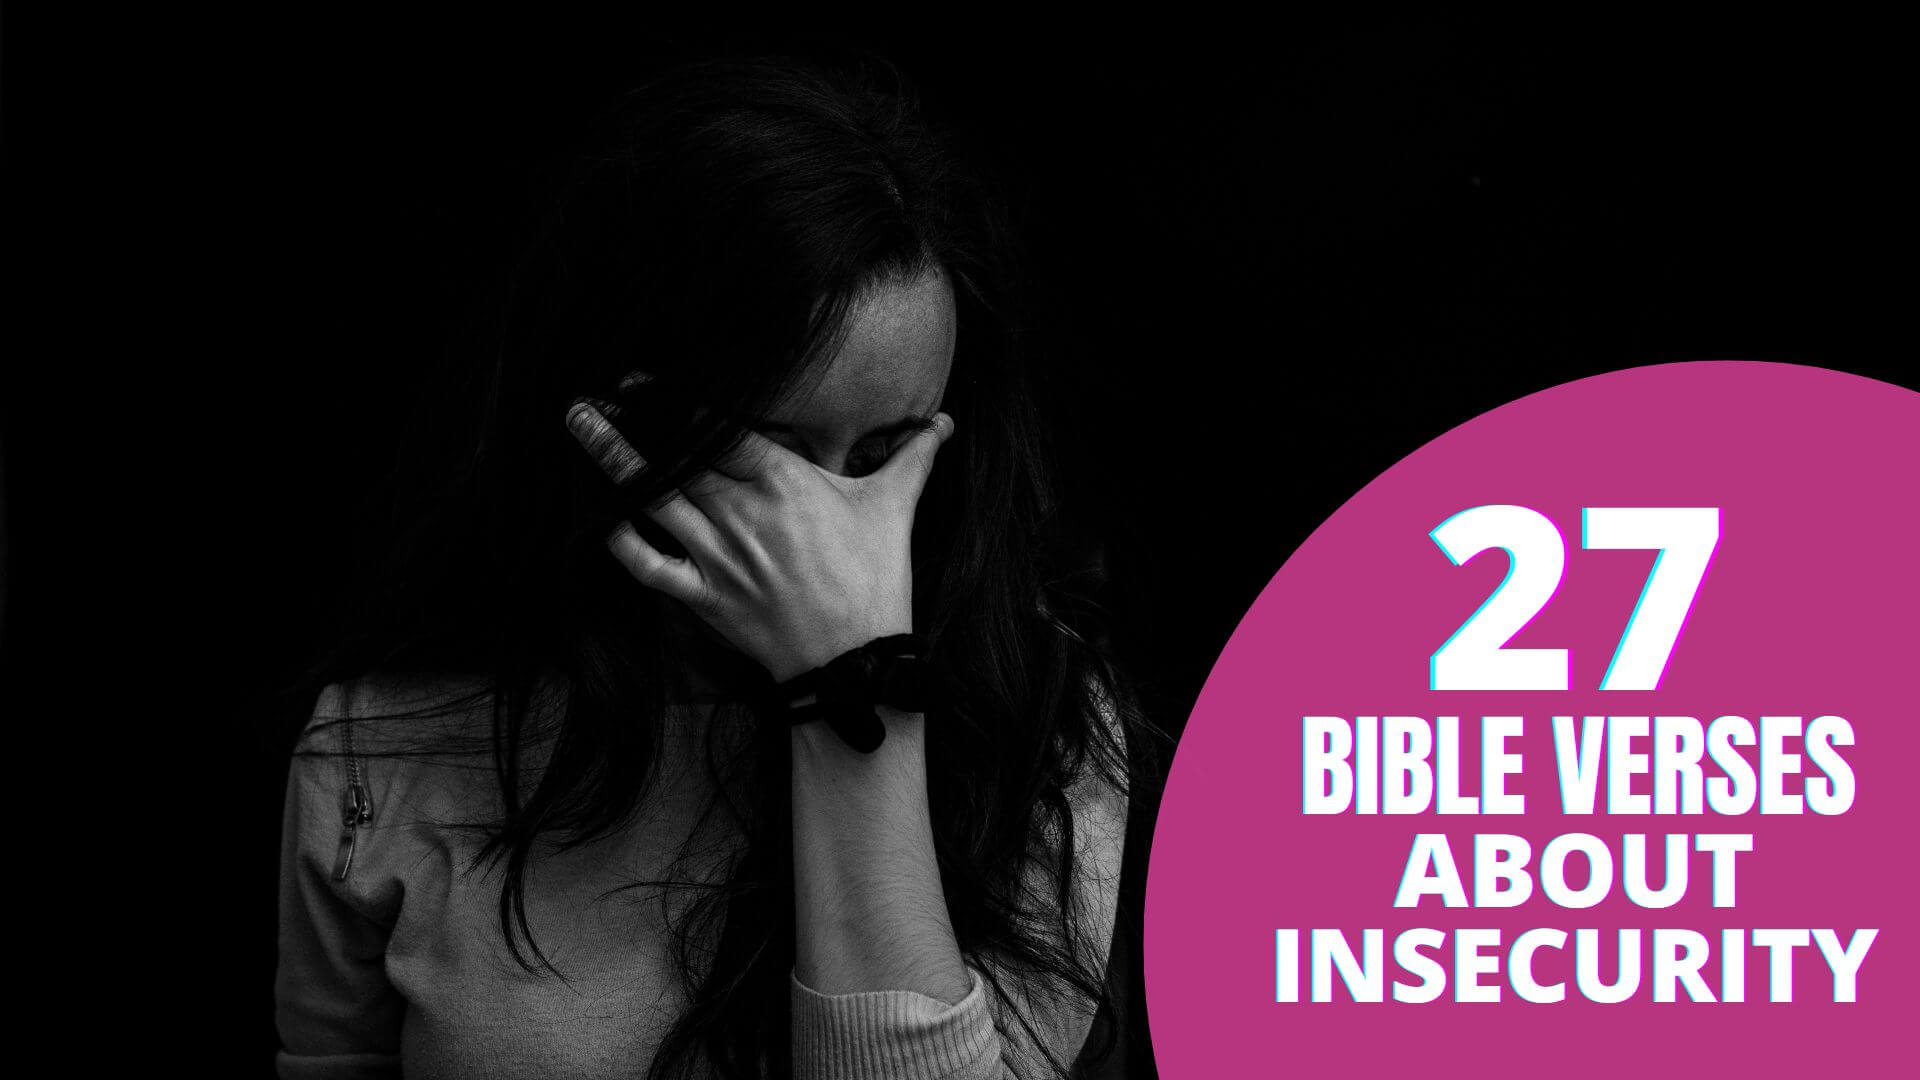 Bible verses about insecurity